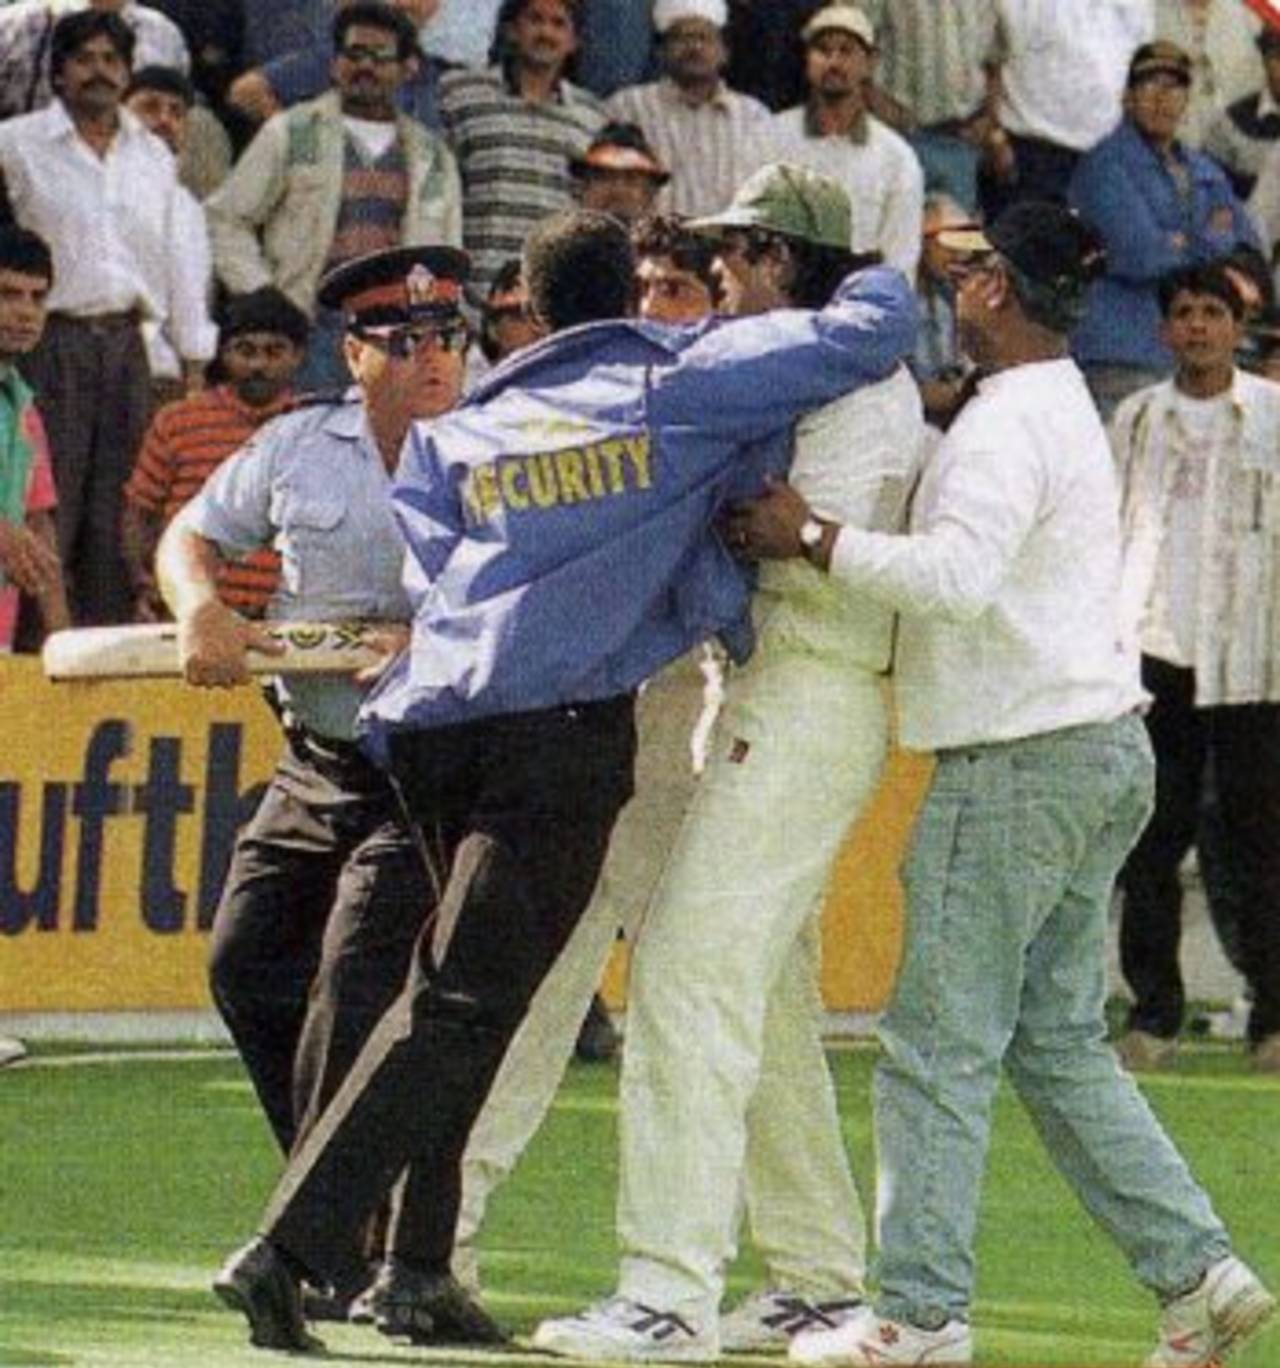 Inzamam-ul-Haq is restrained by security officials after attacking a spectator, India v Pakistan, Toronto, September 14, 1997